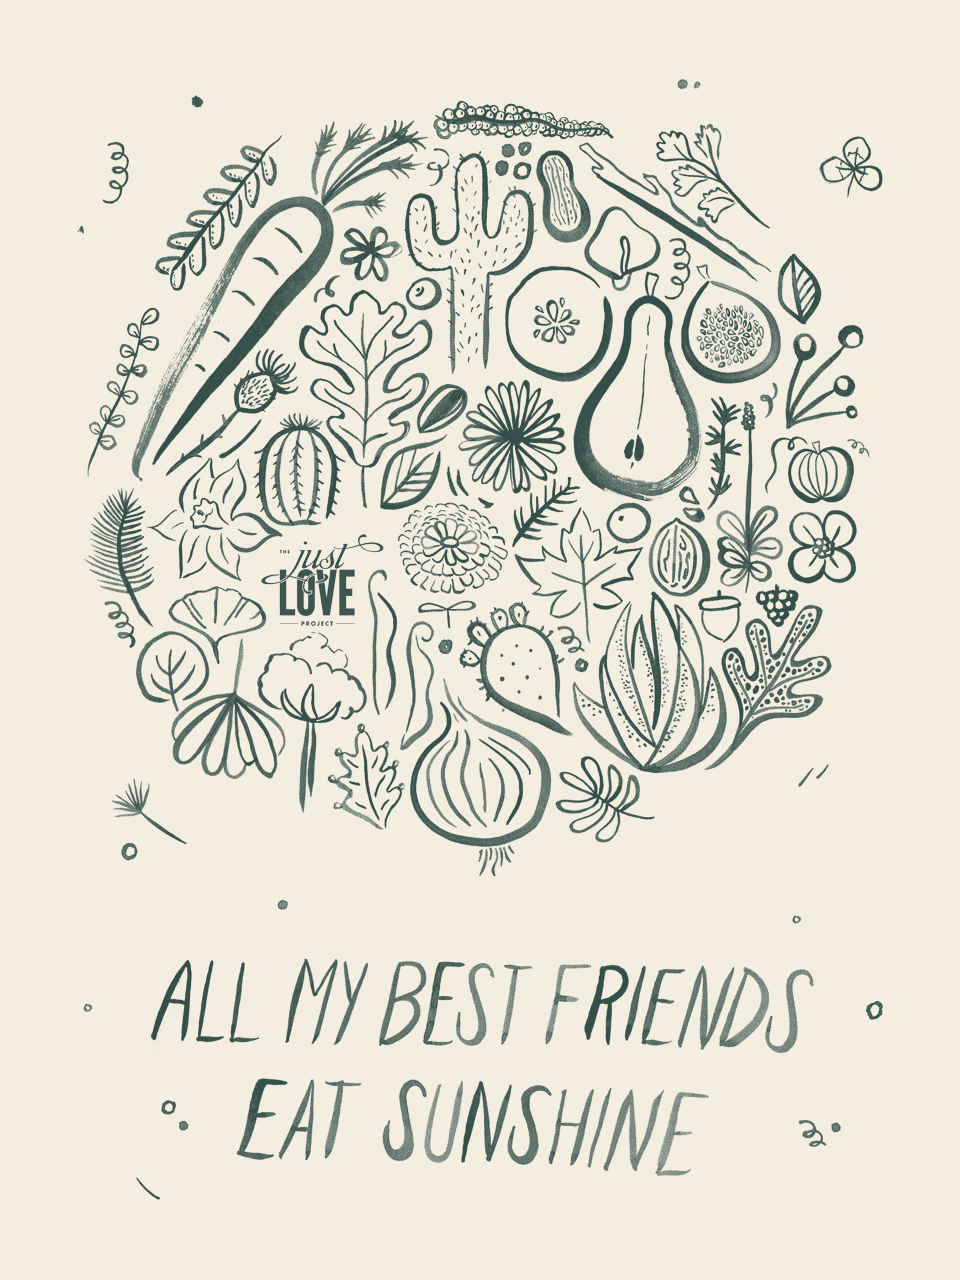 Poster with a collage of drawn plants that says "All my best friends eat sunshine"